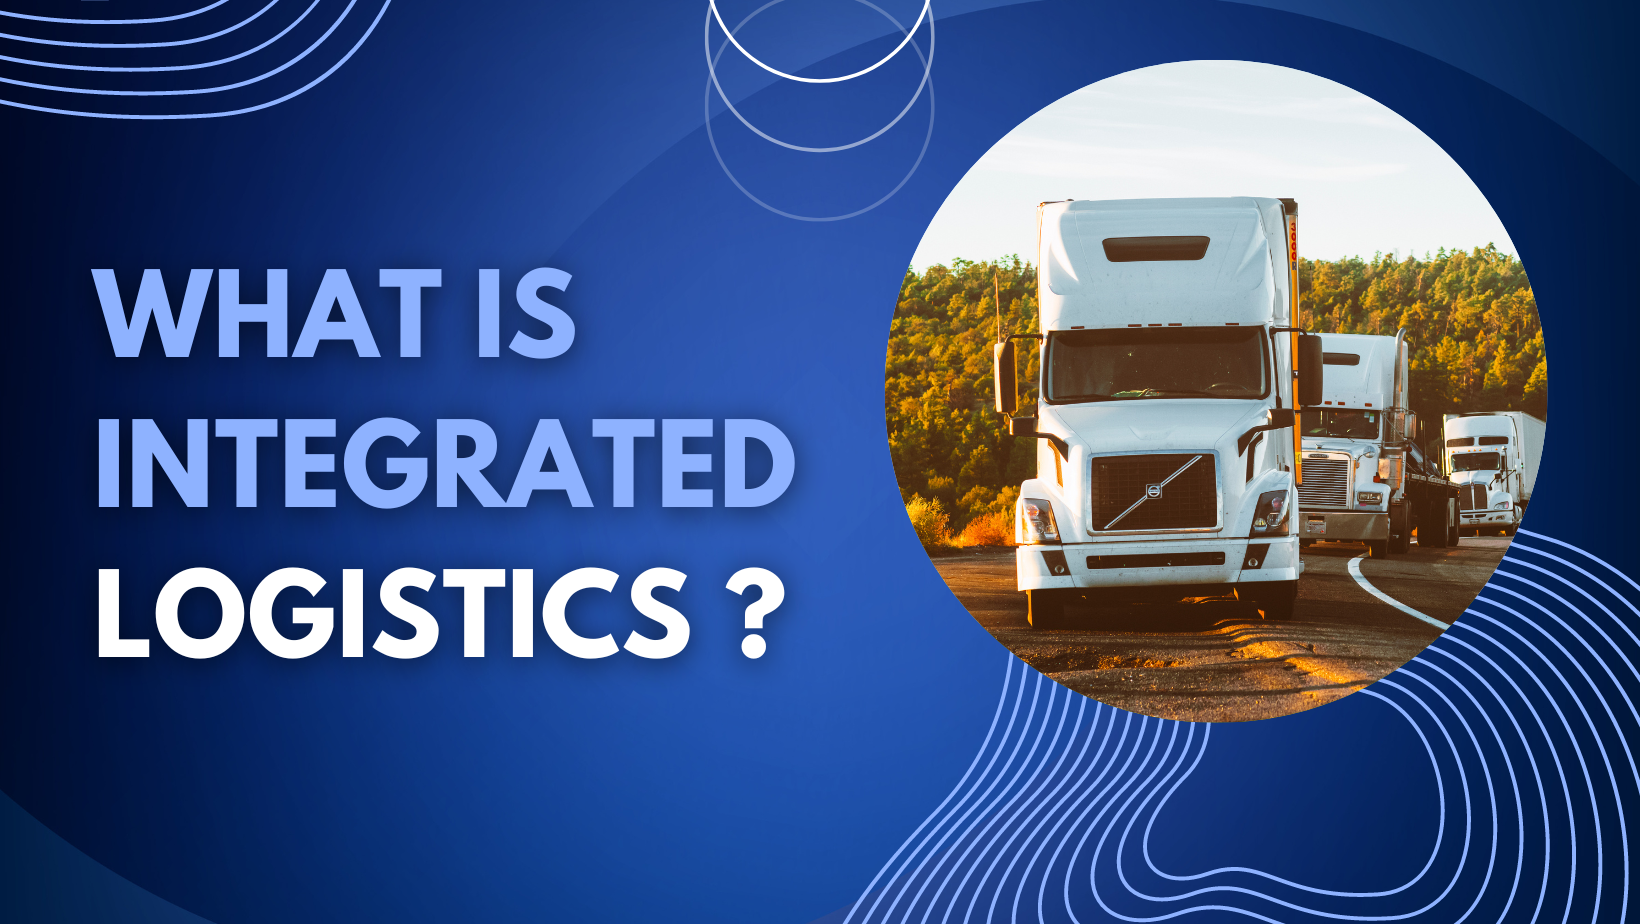 What is Integrated Logistics